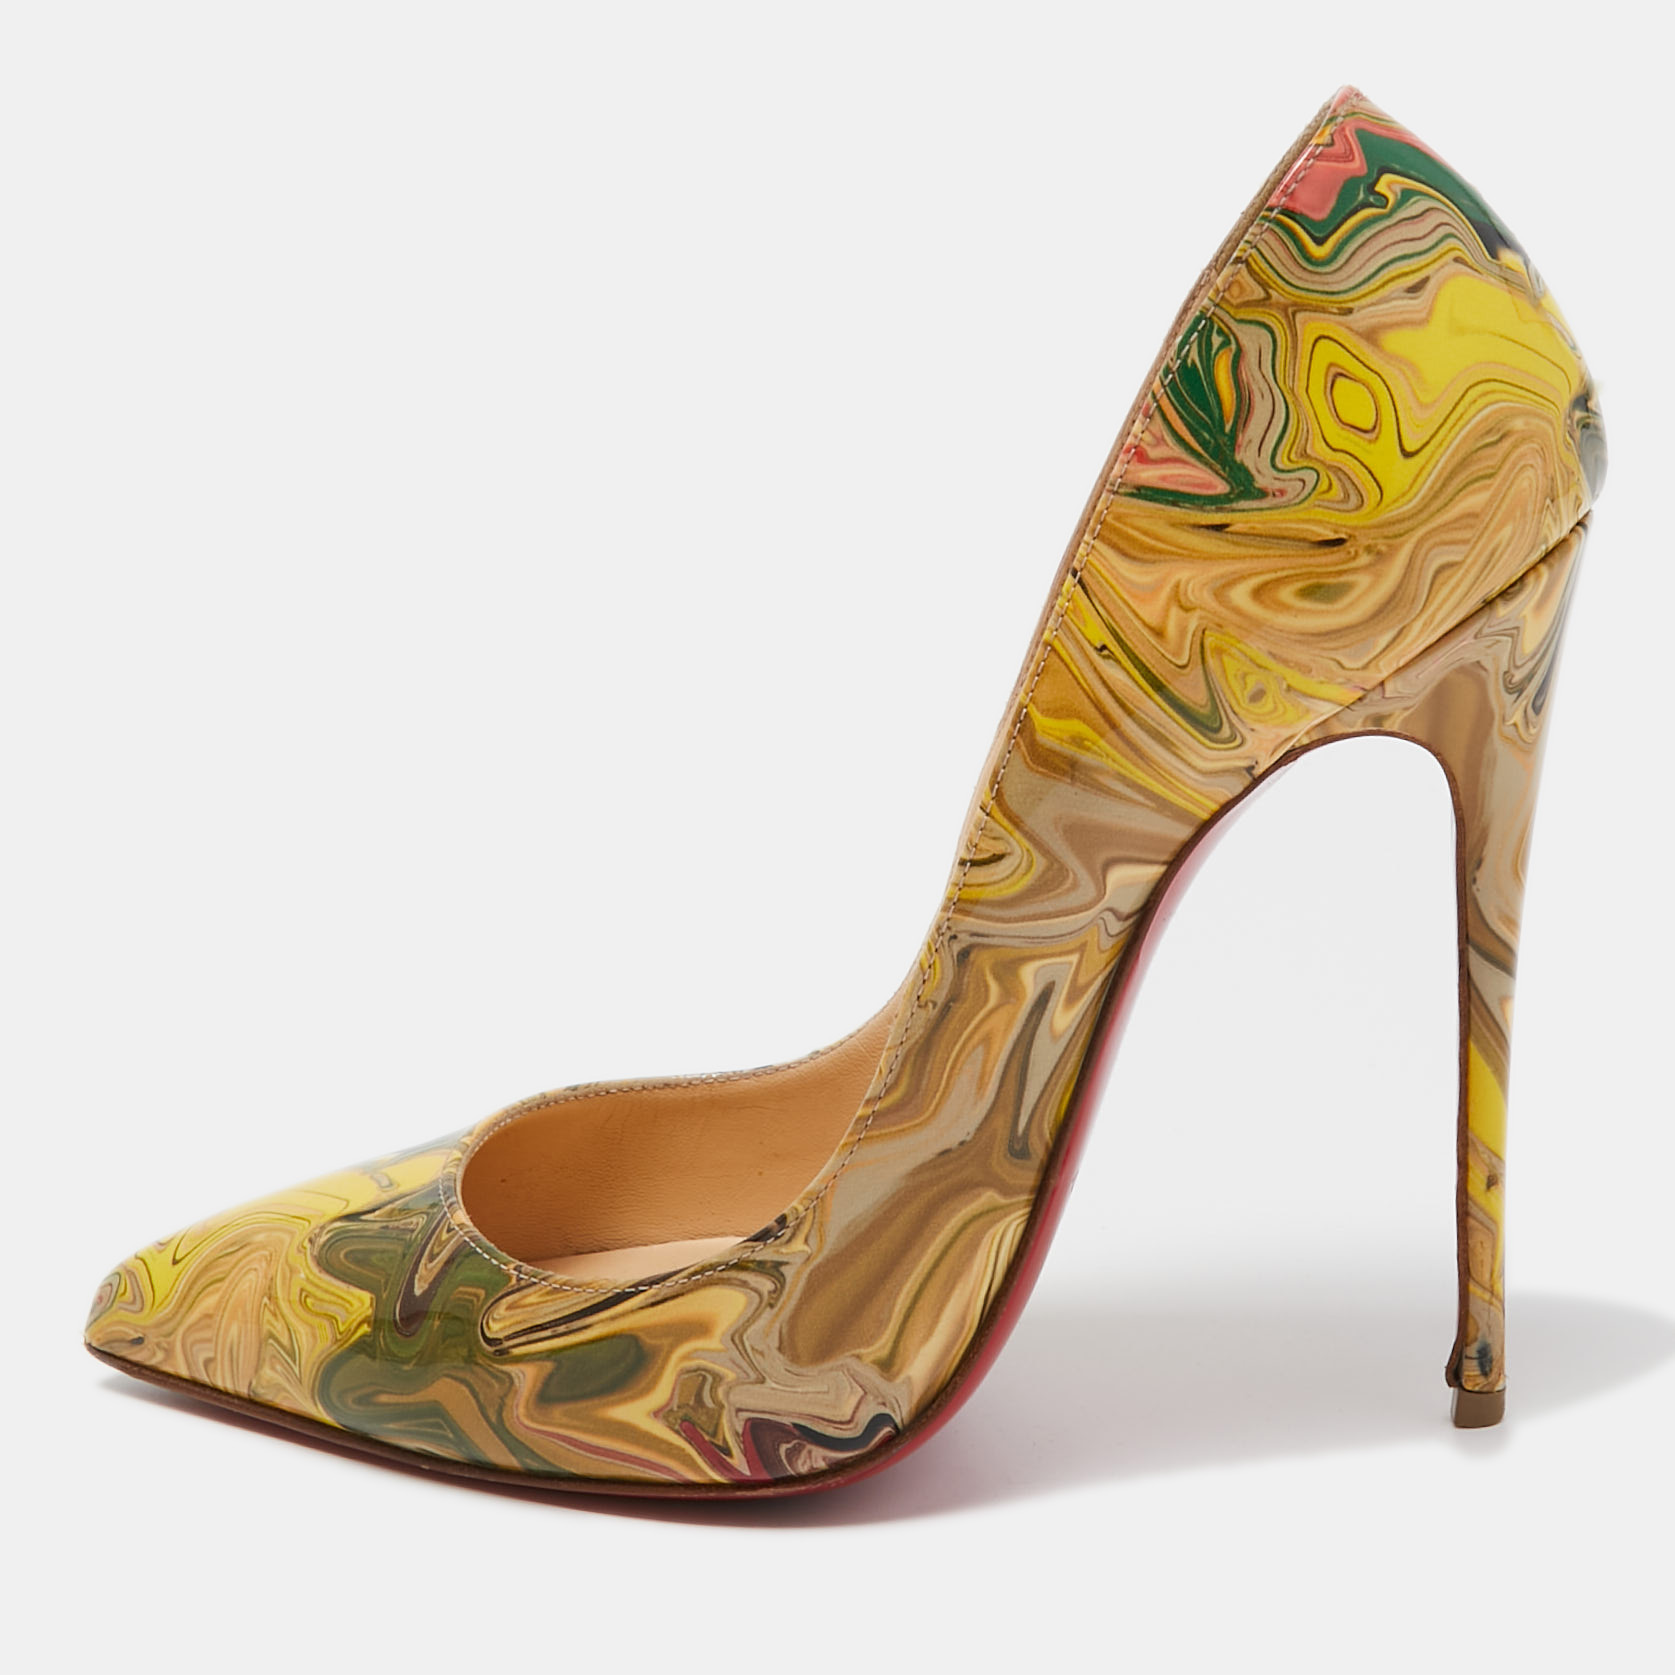 Pre-owned Christian Louboutin Multicolor Marble Print Patent Leather Pigalle Follies Pumps Size 37.5